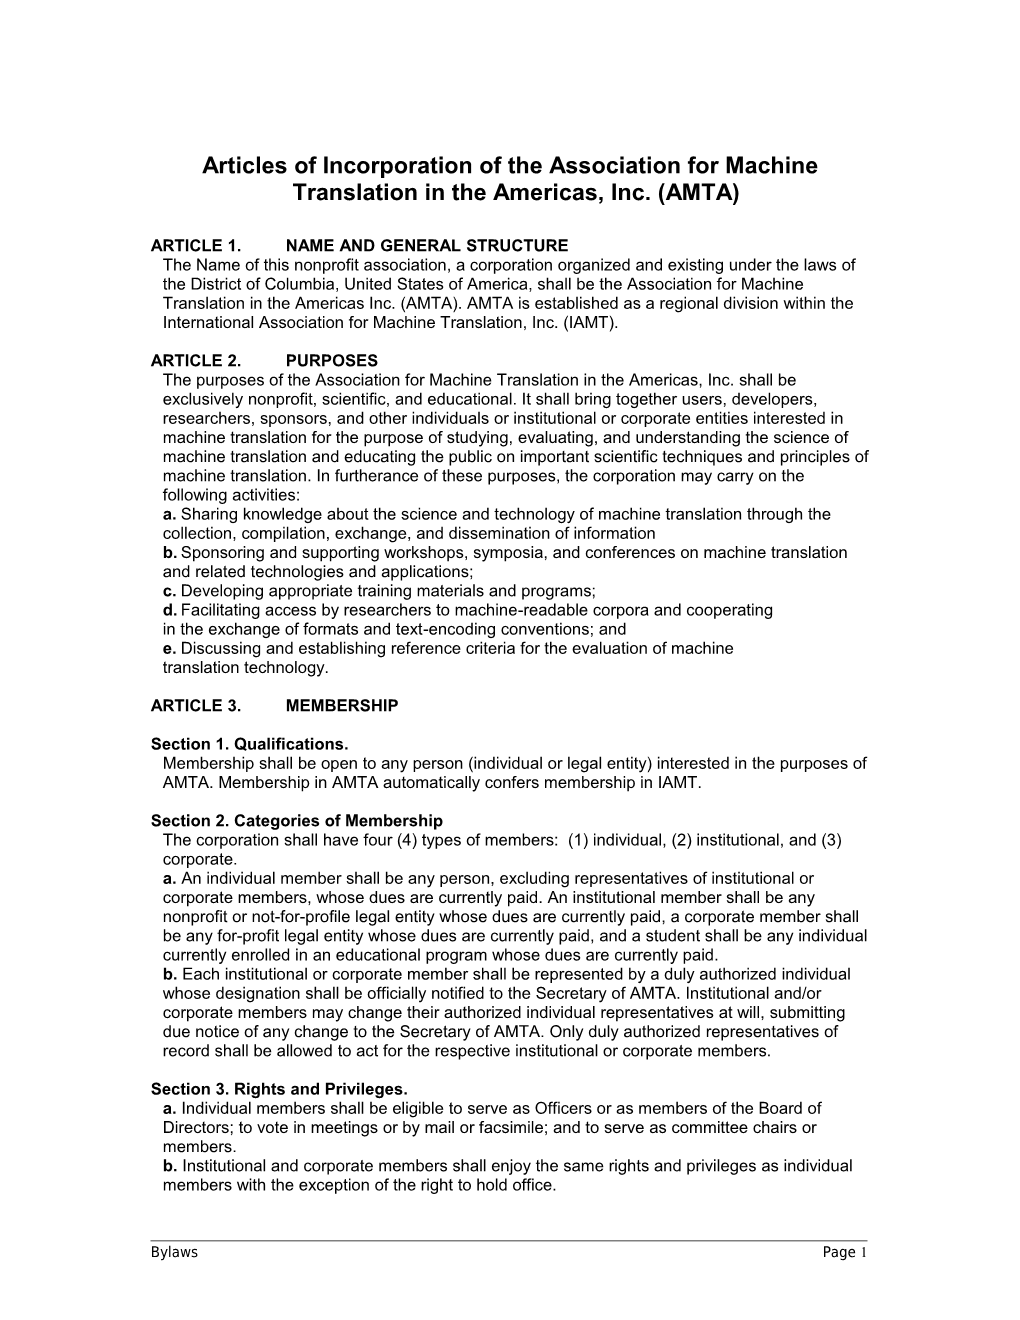 Articles of Incorporation of the Association for Machine Translation in the Americas, Inc